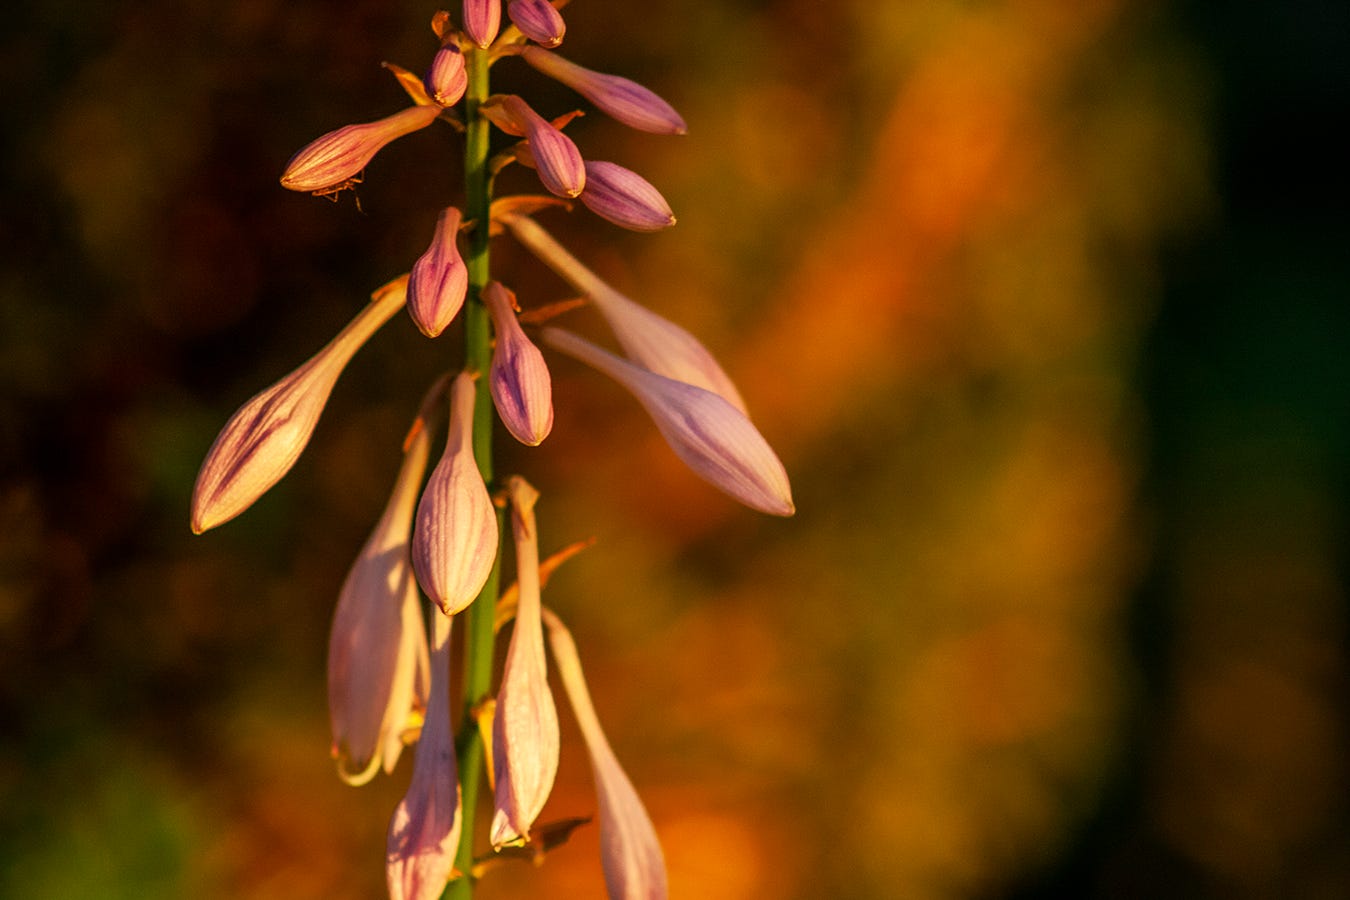 A photo of flowers from a hosta plant.